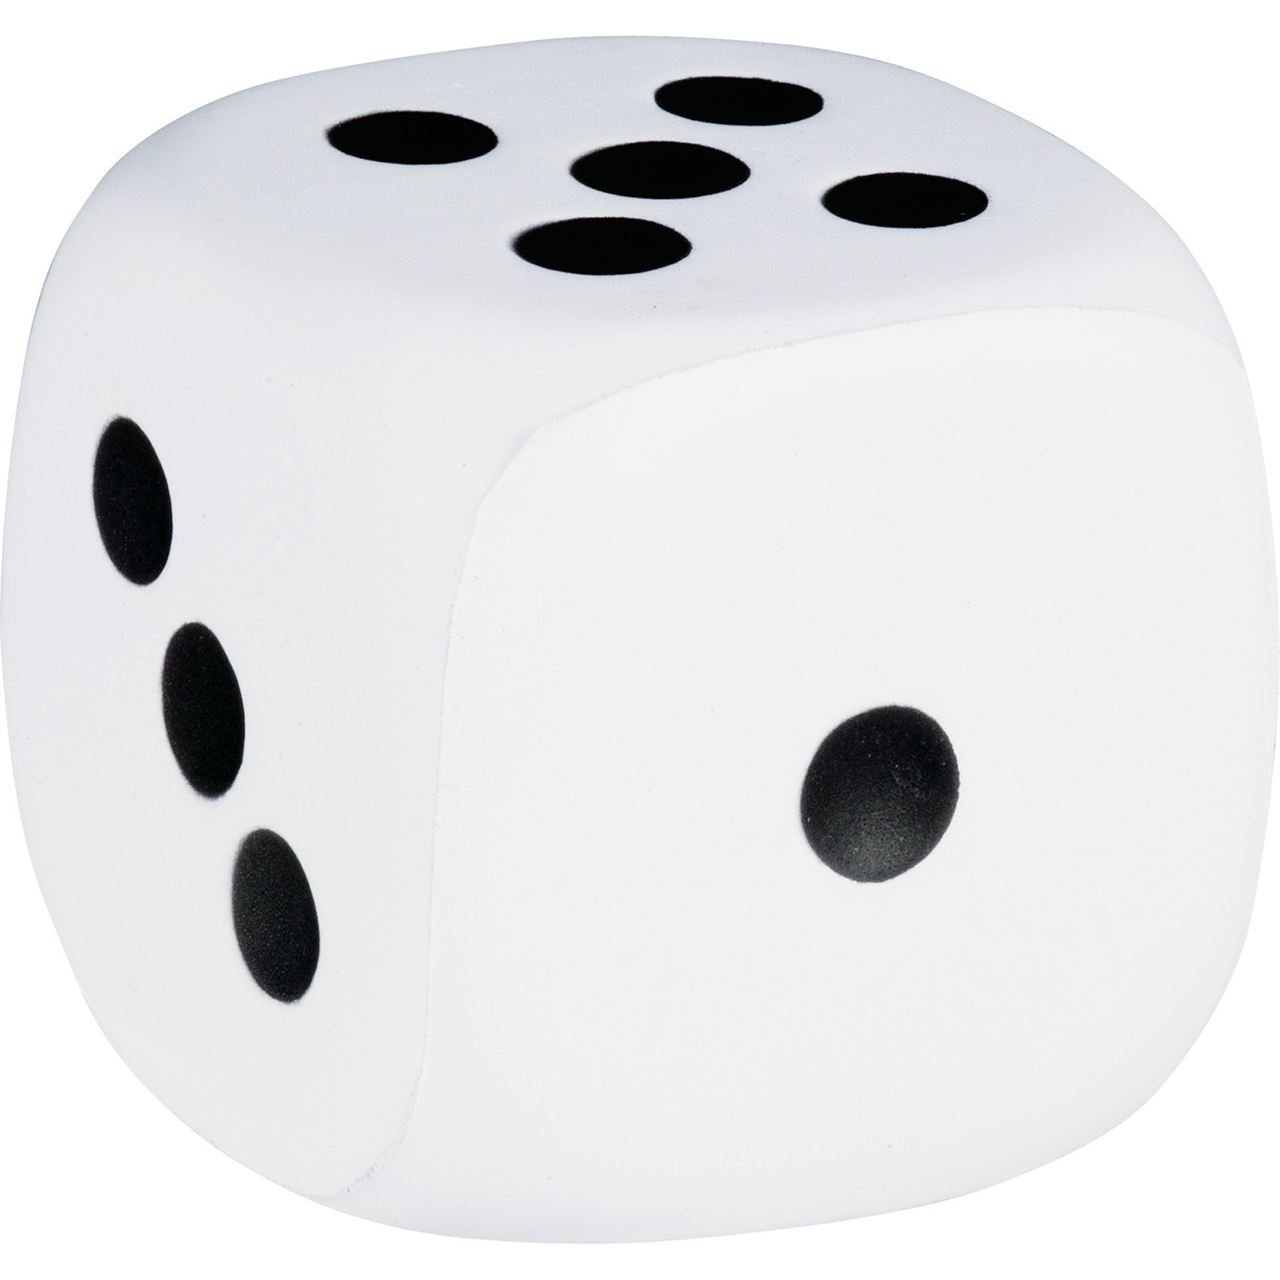 Picture of Bullet Dice Stress Reliever